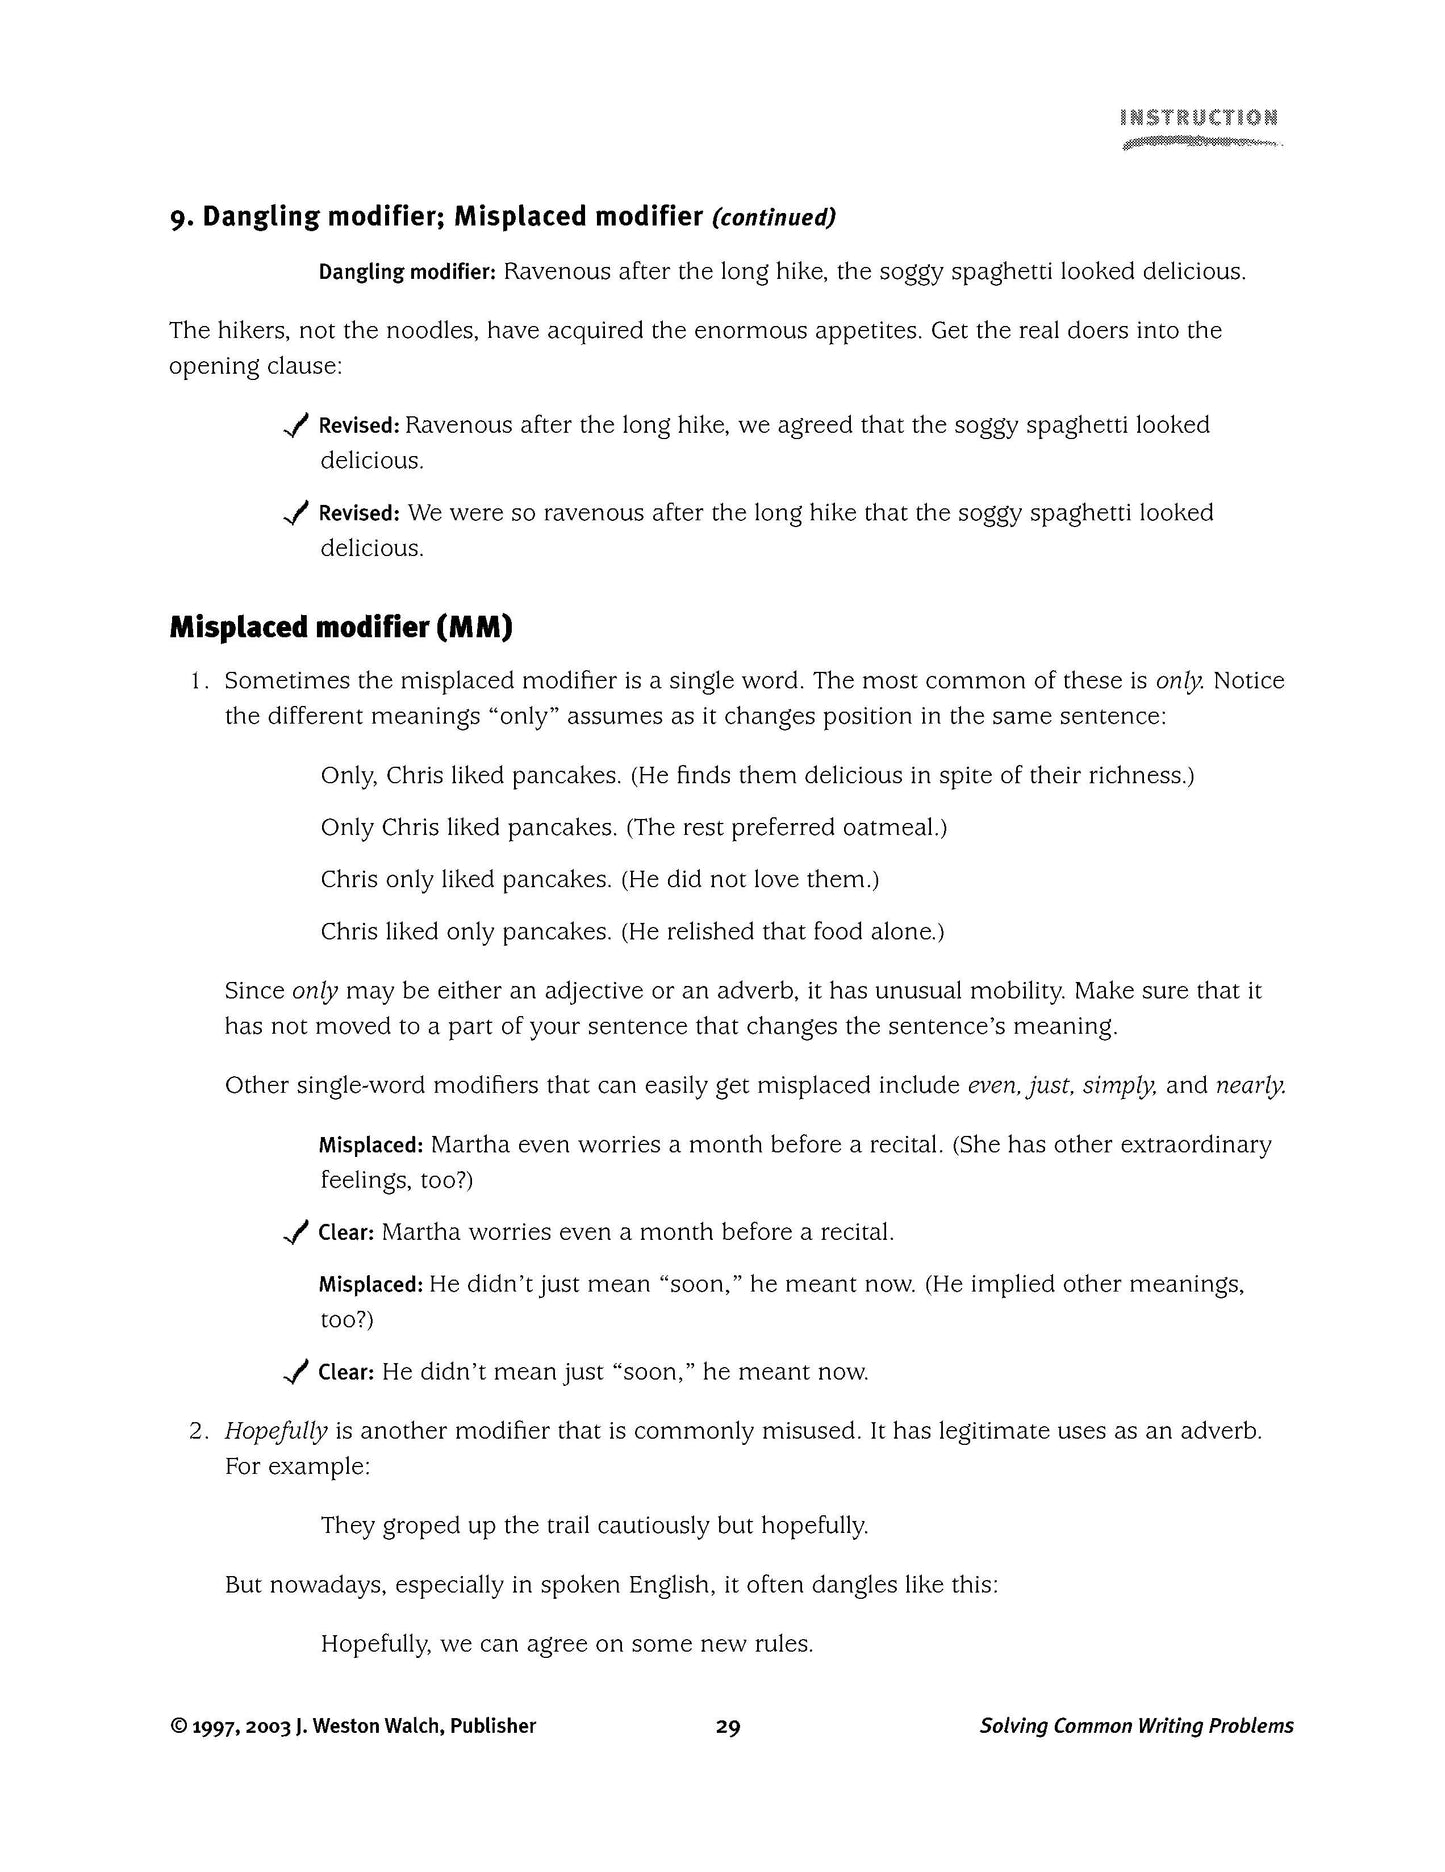 Solving Common Writing Problems, Bright Education Australia, Book, Grammar, English, School Materials, Games, Puzzles, Activities, Teaching Resources